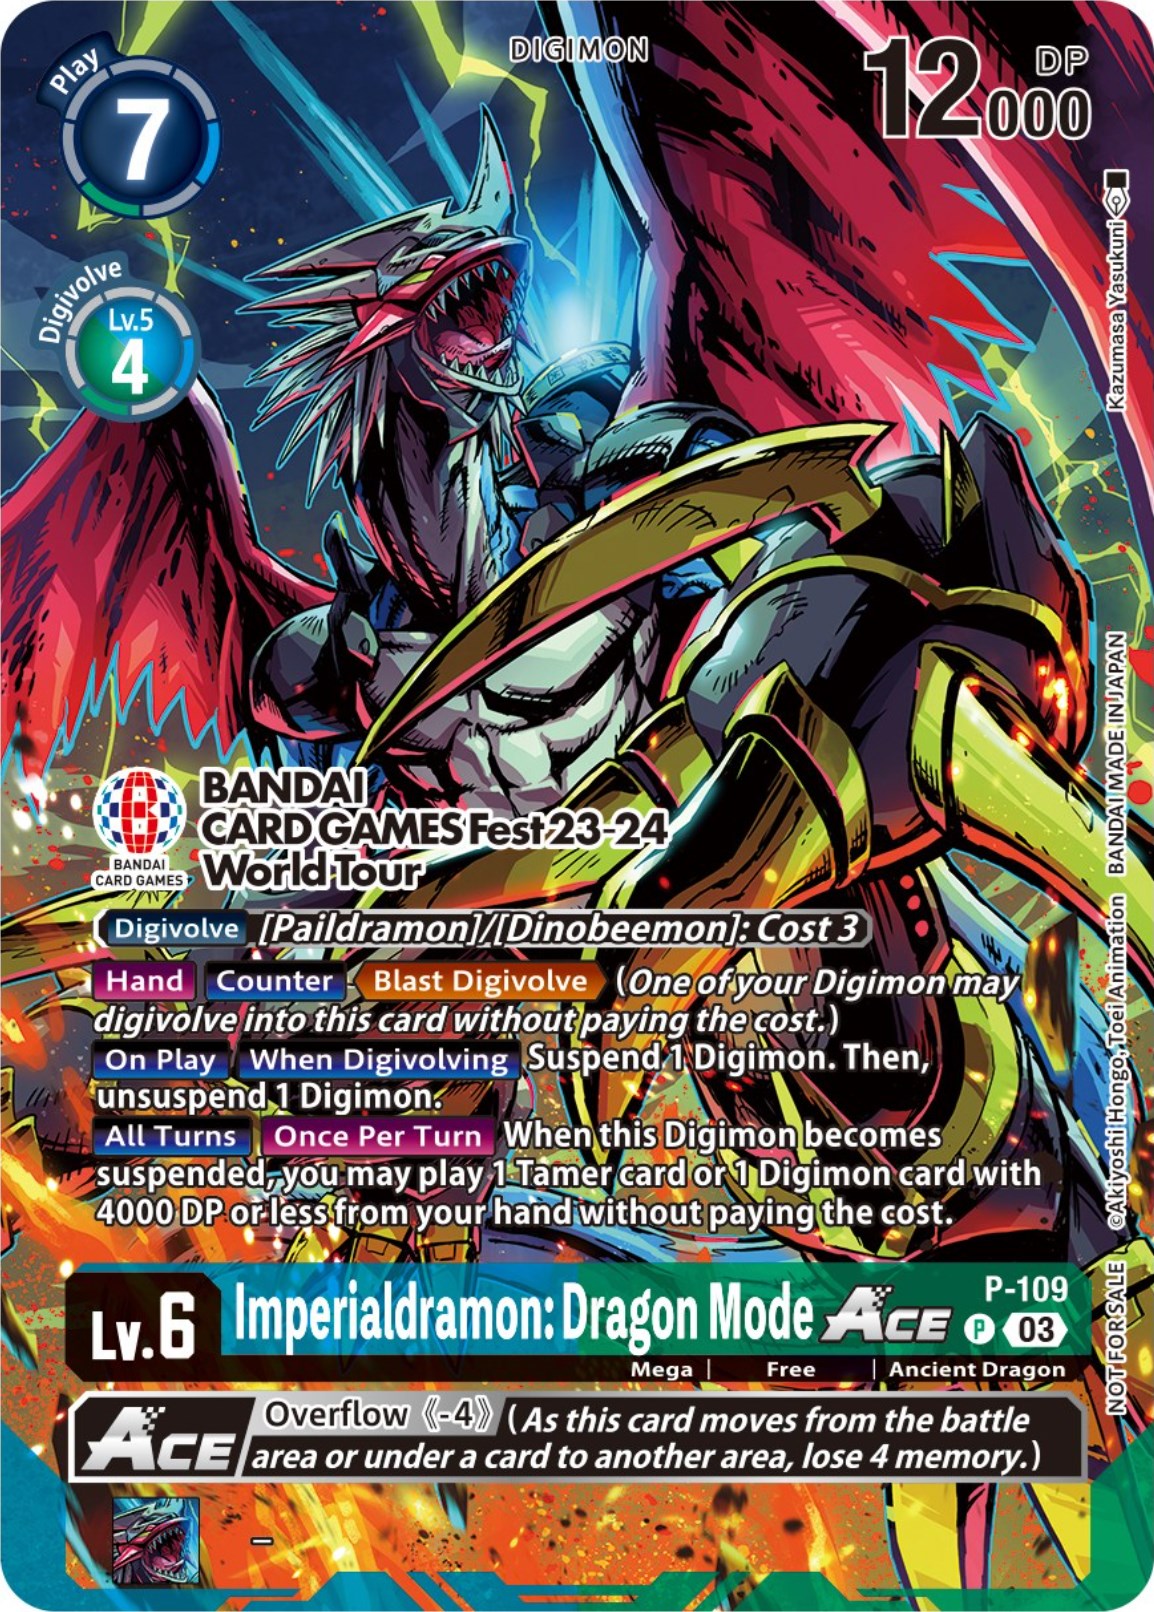 Imperialdramon: Dragon Mode Ace [P-109] (BANDAI Card Games Fest 23-24 World Tour) [Promotional Cards] | The Time Vault CA